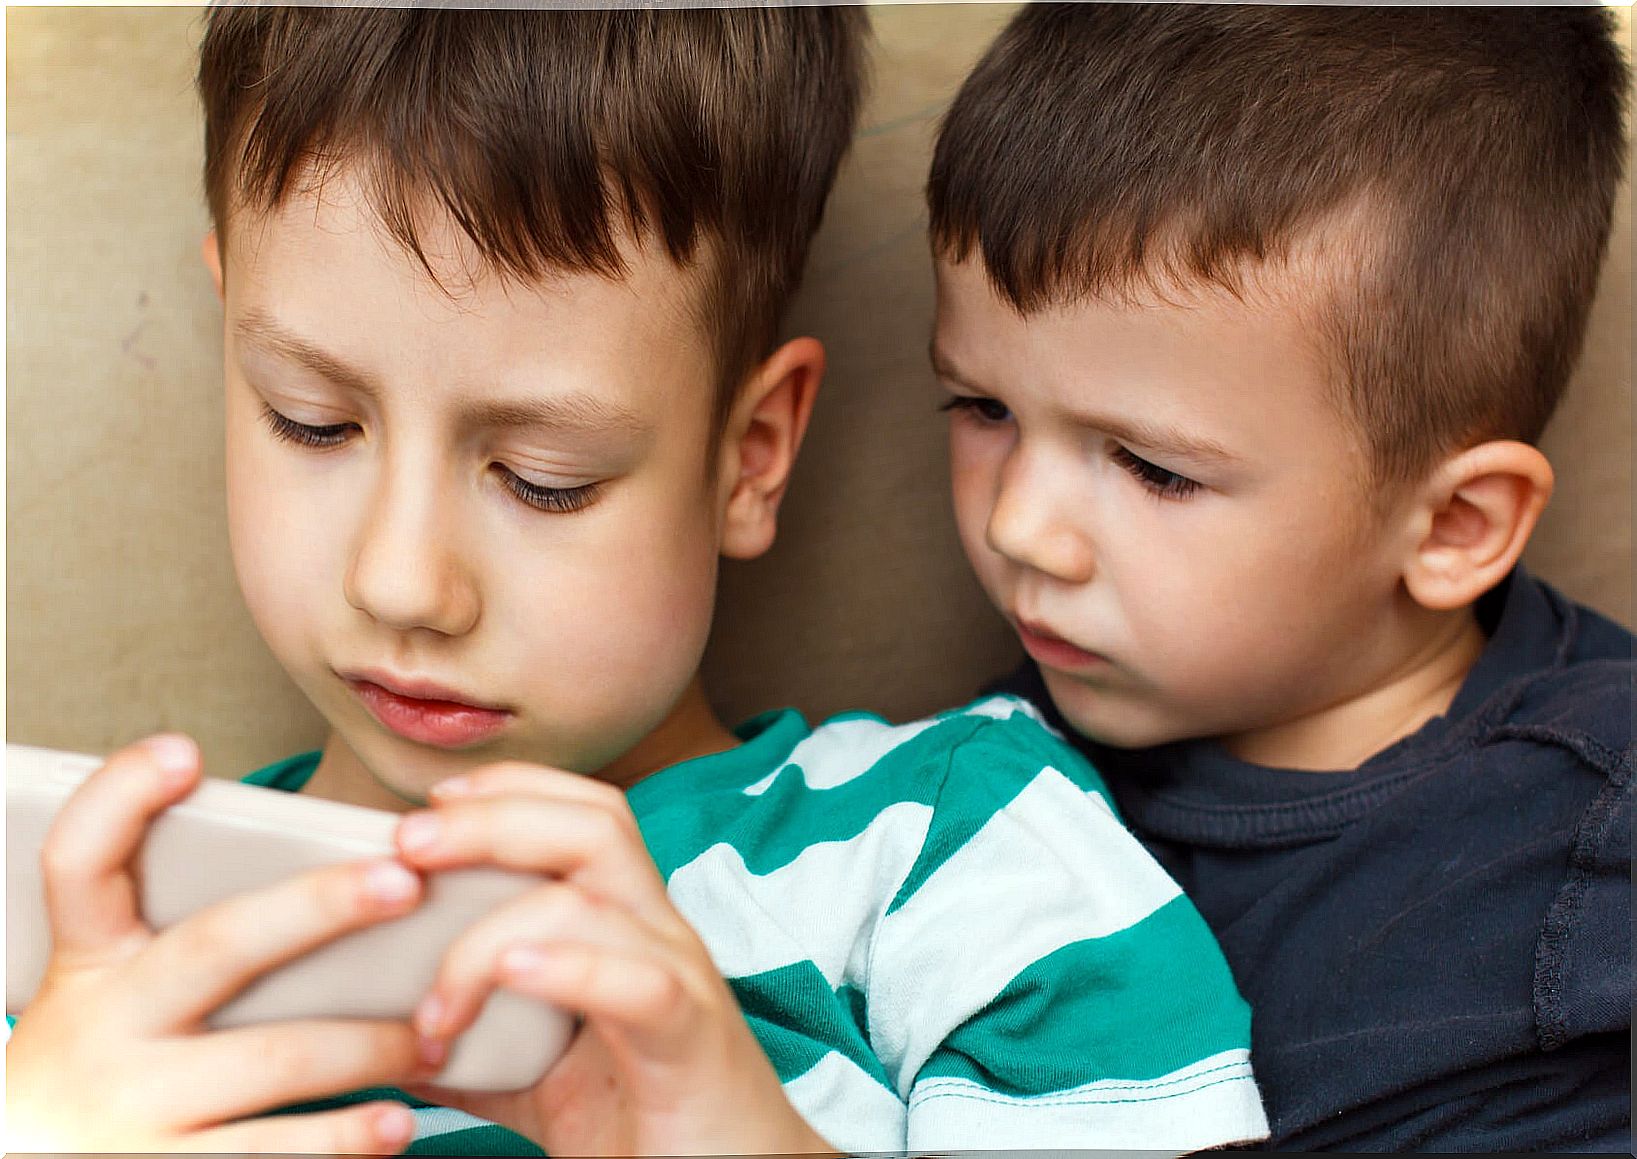 Is it worth paying for children's apps on mobile devices?